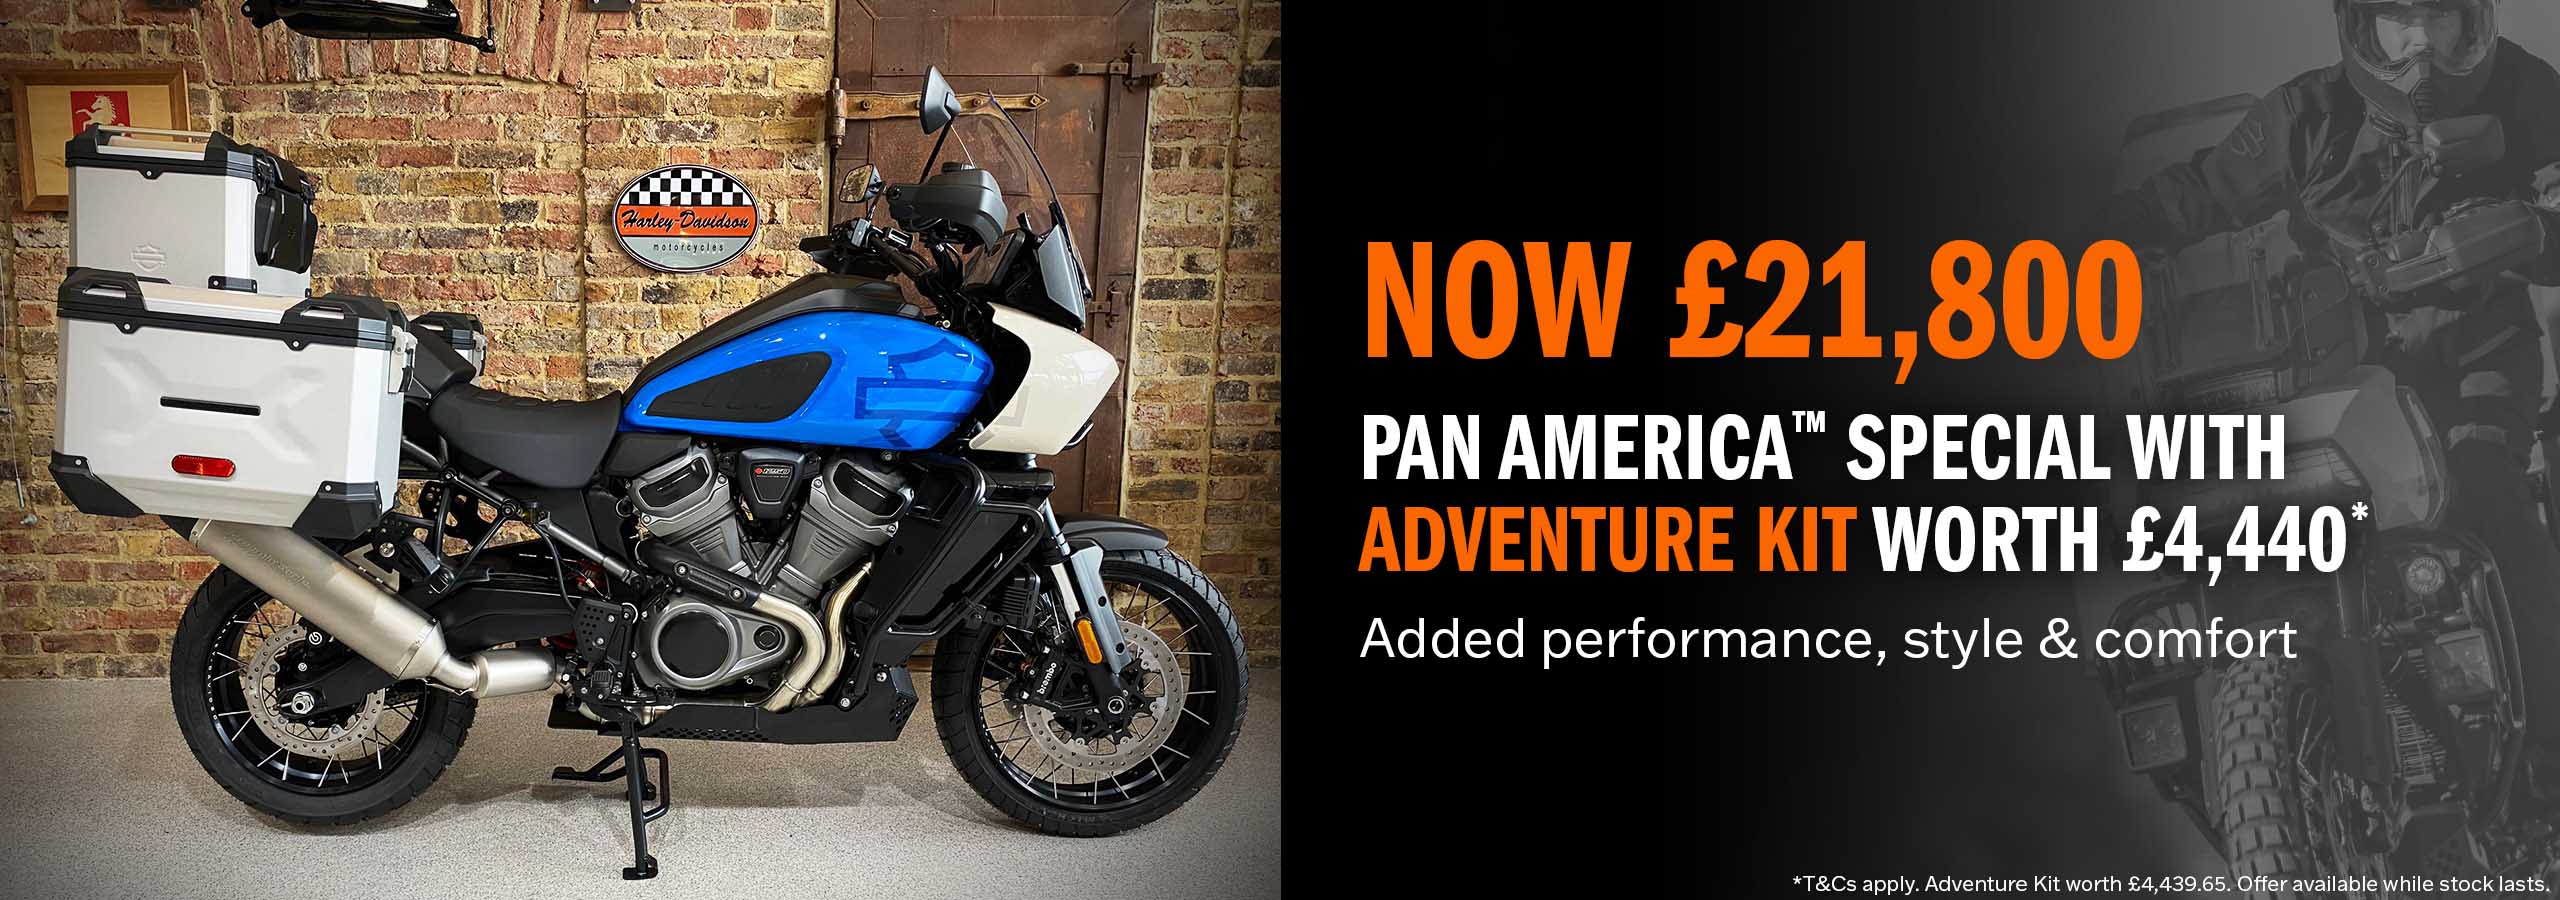 Pan America 1250 Special with Adventure Kit available at Maidstone Harley-Davidson